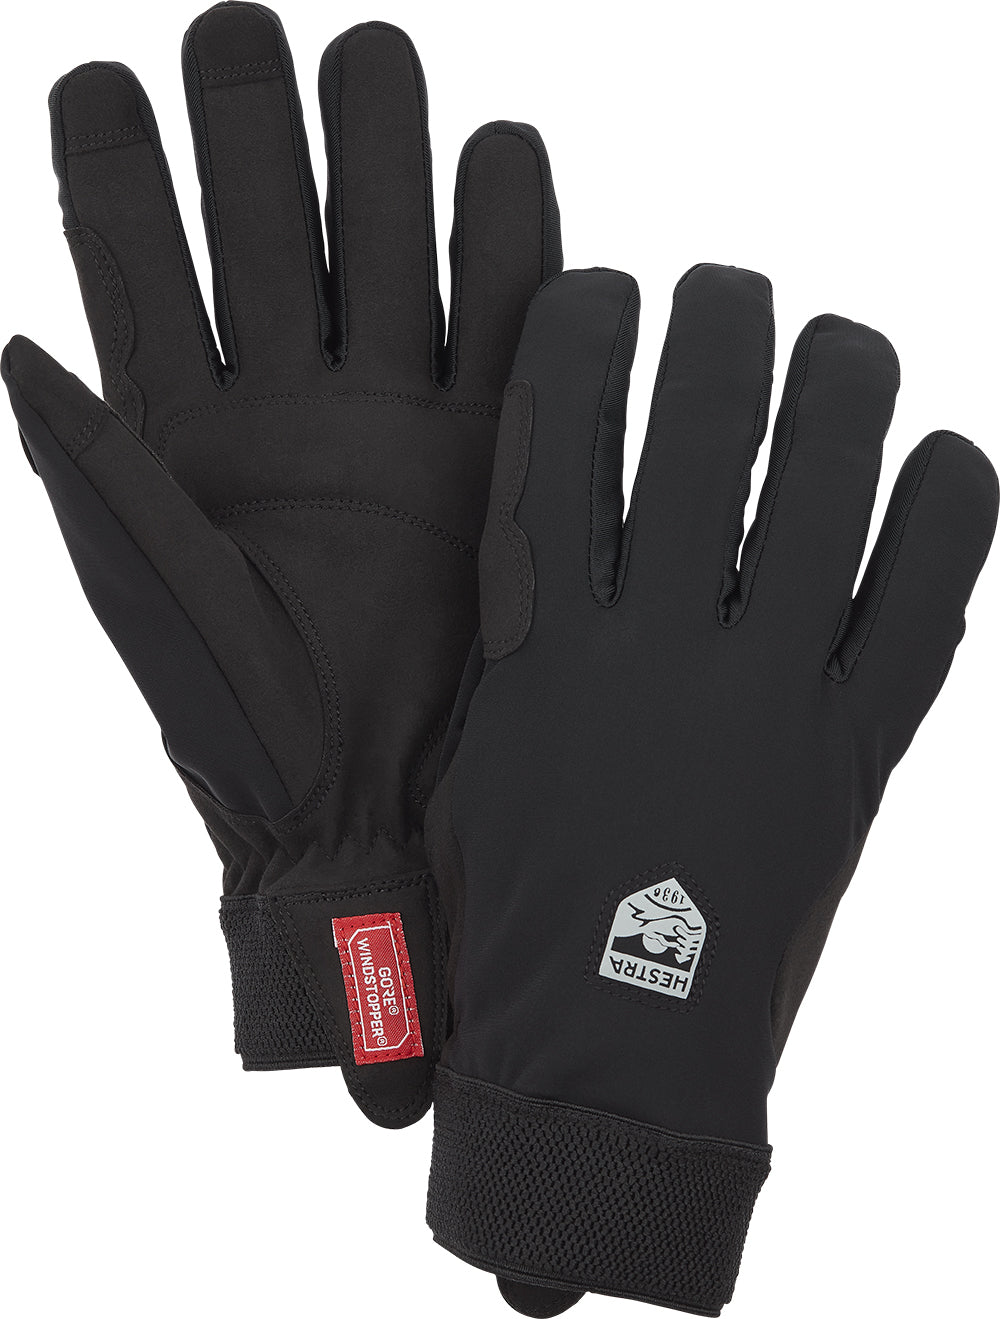 MEN'S CYCLING GLOVES